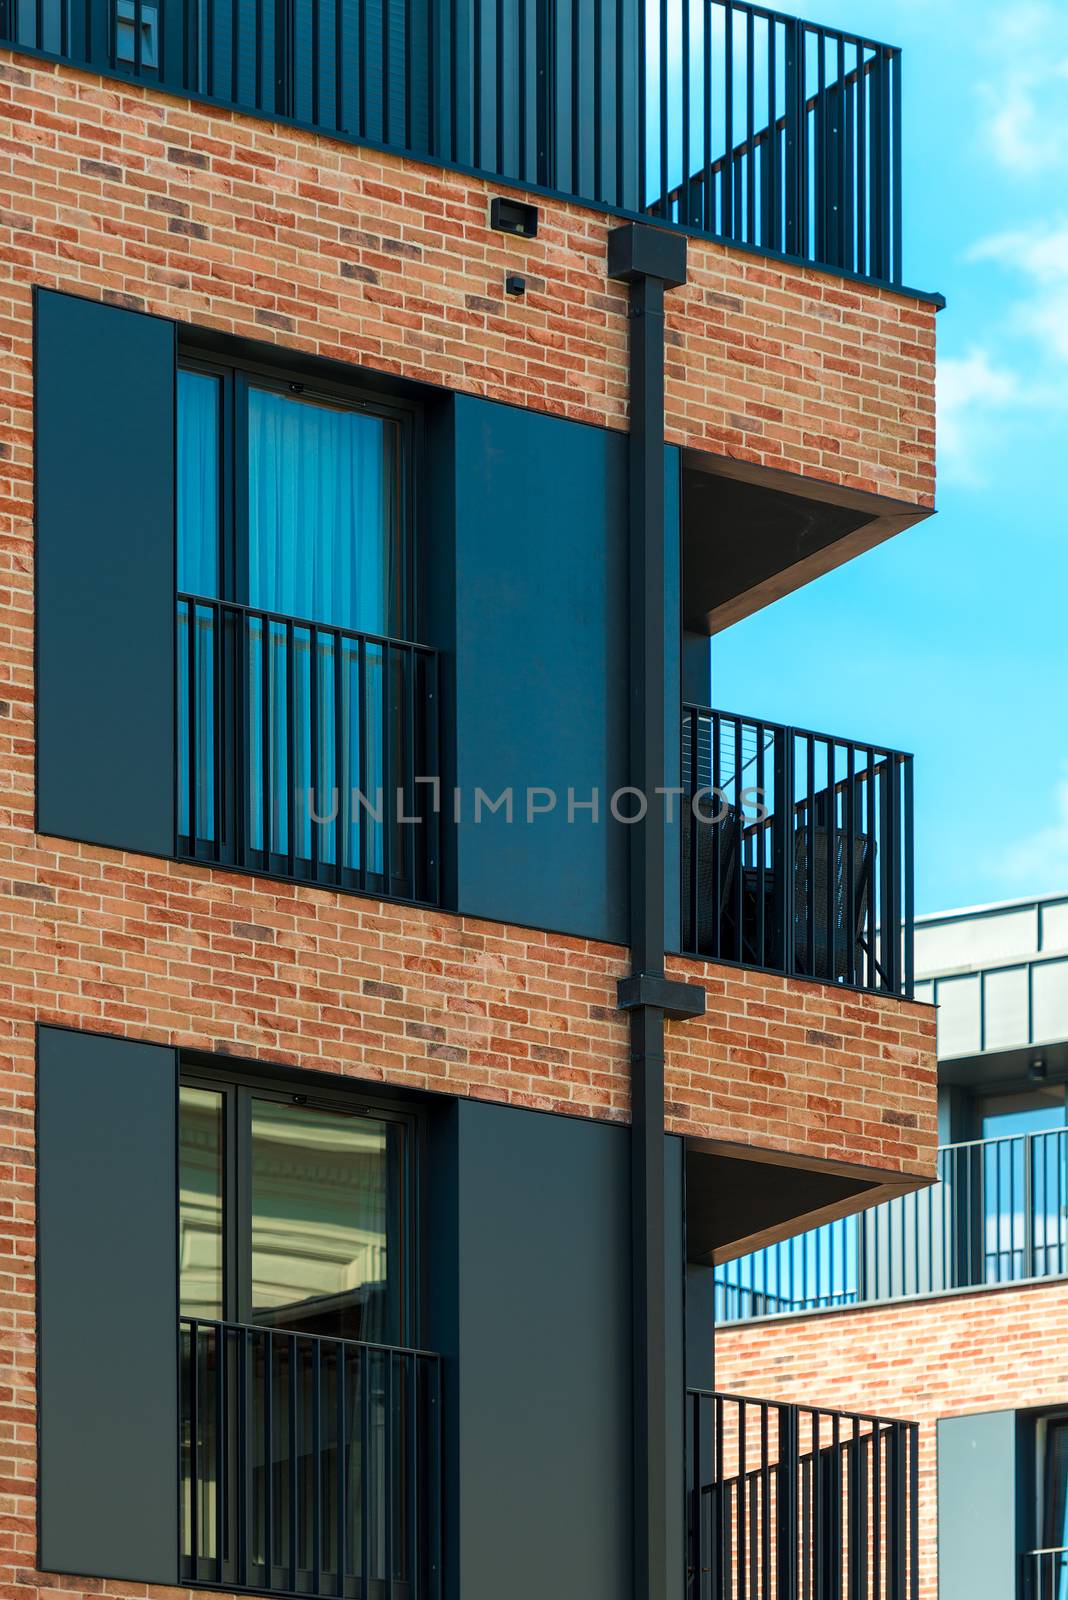 elements of a modern brick building - balconies and windows by kosmsos111